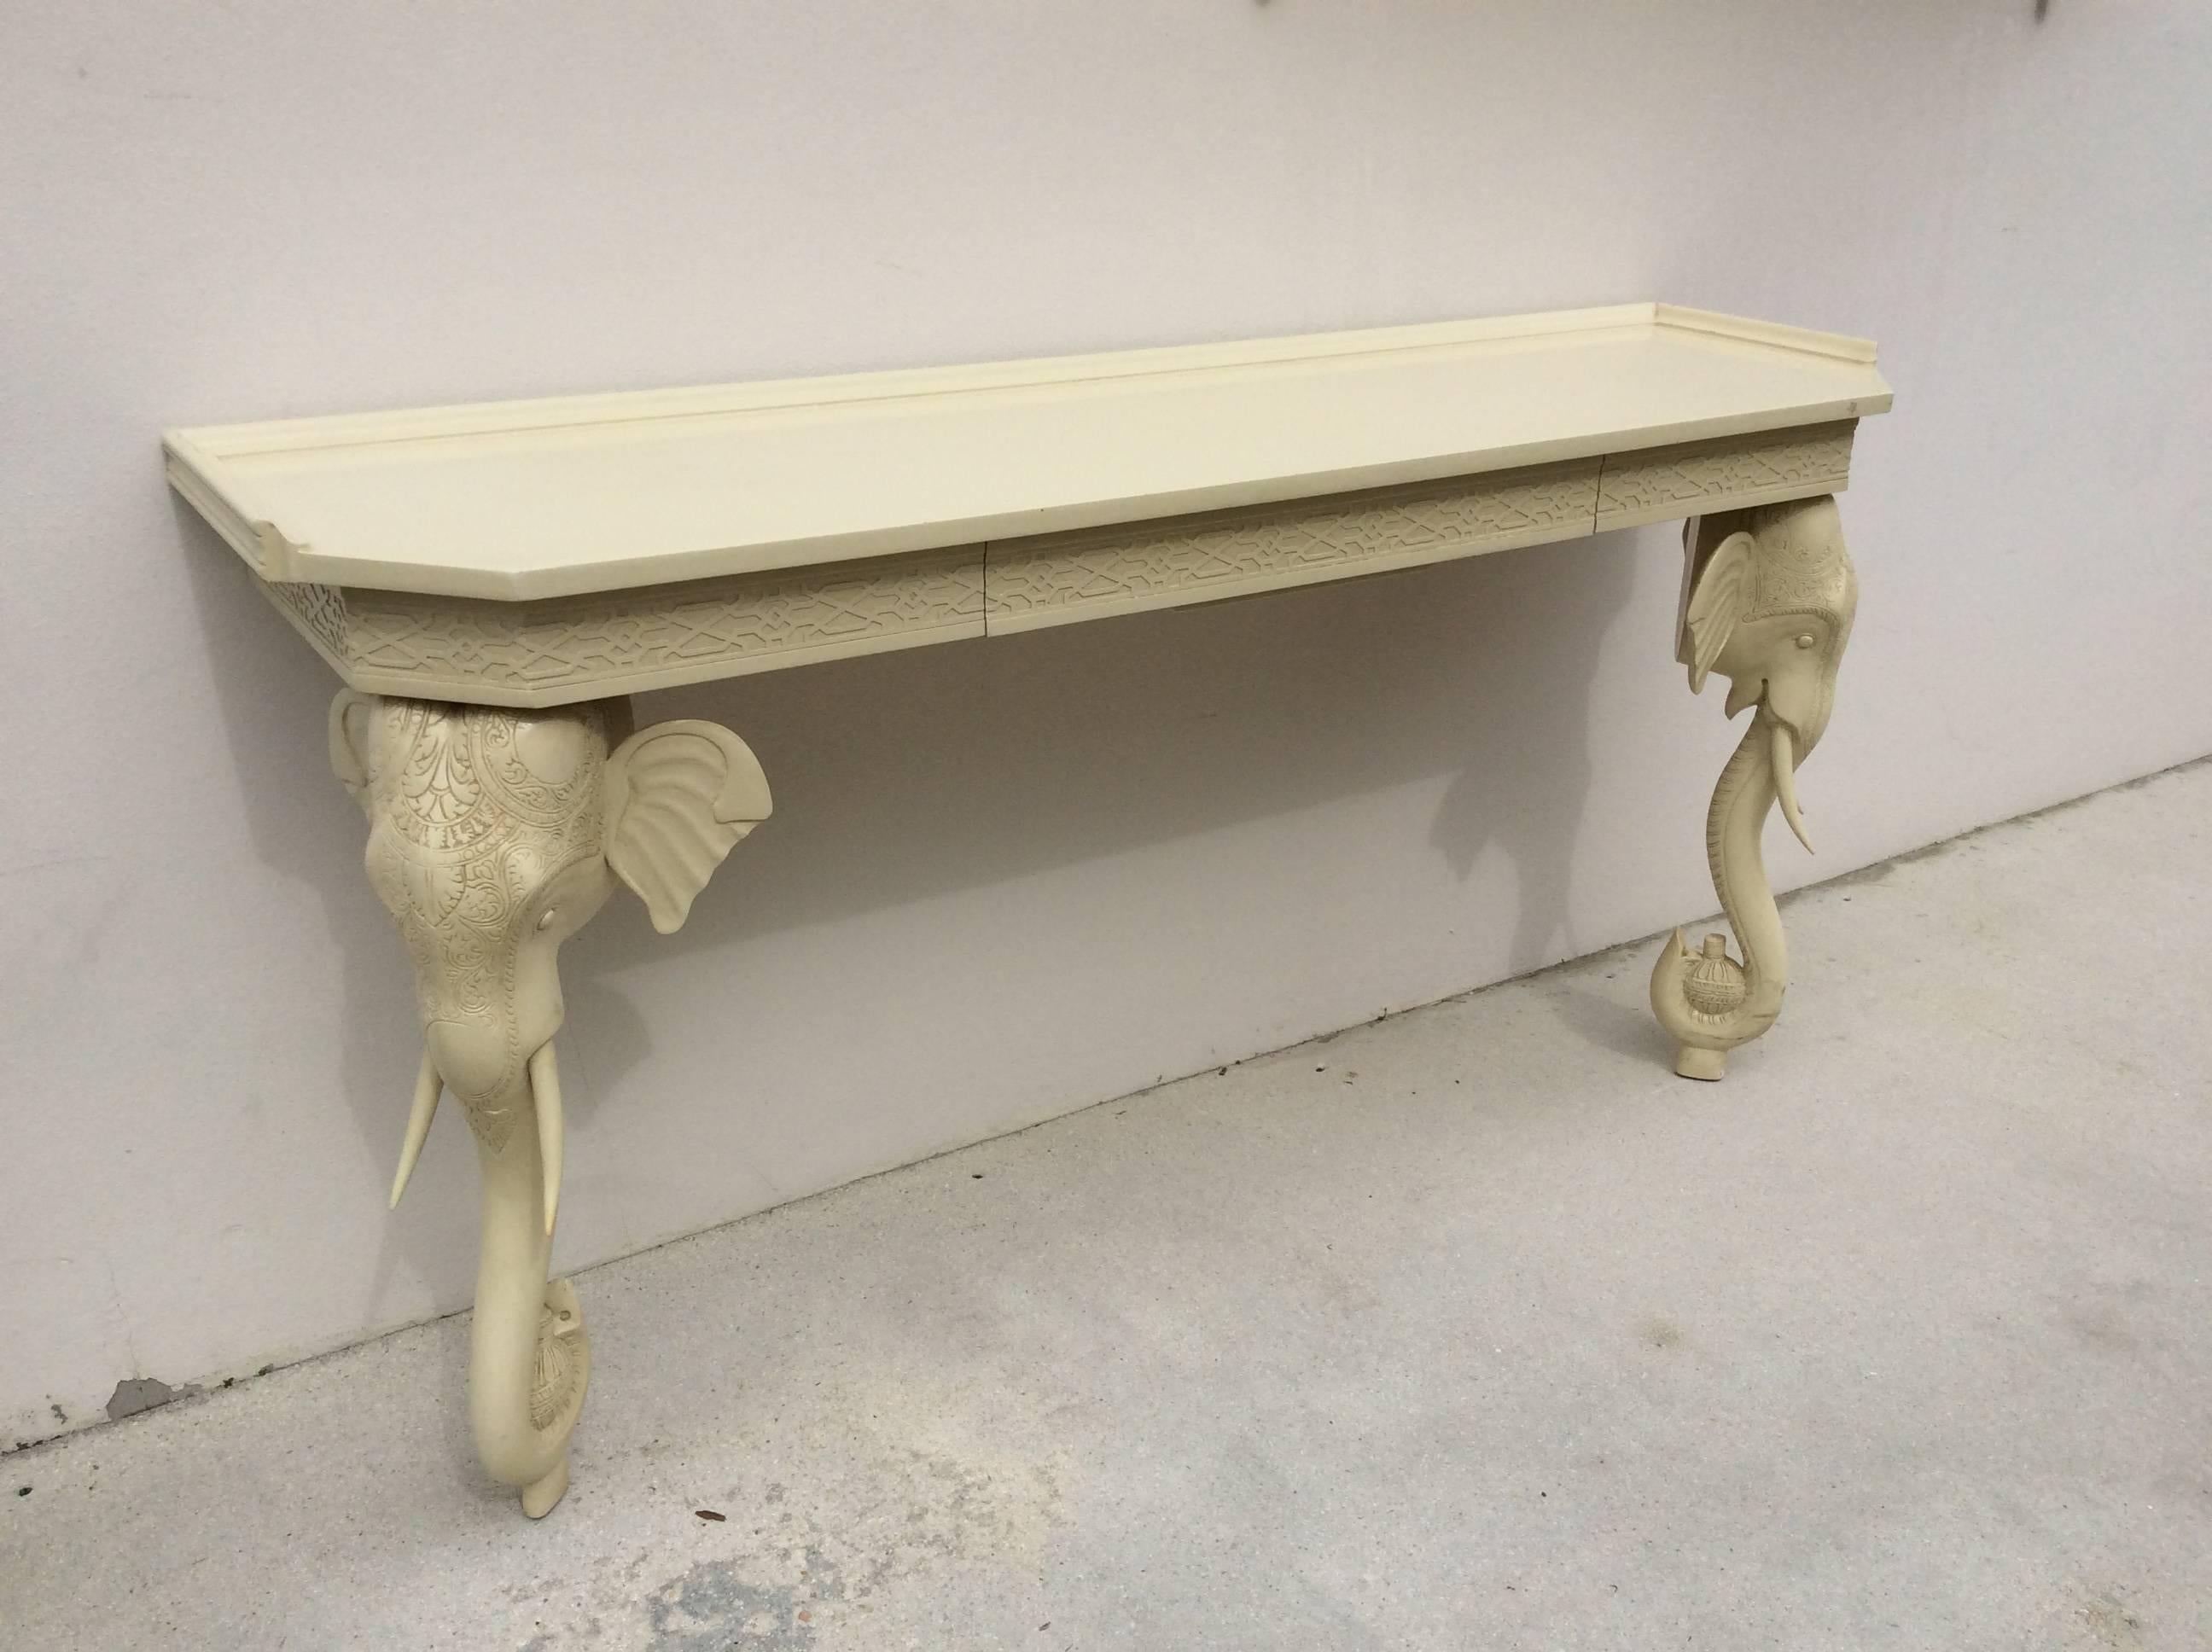 Lacquer Vintage Gampel and Stoll Elephant Wall Console Table Desk Fretwork Chinoiserie 